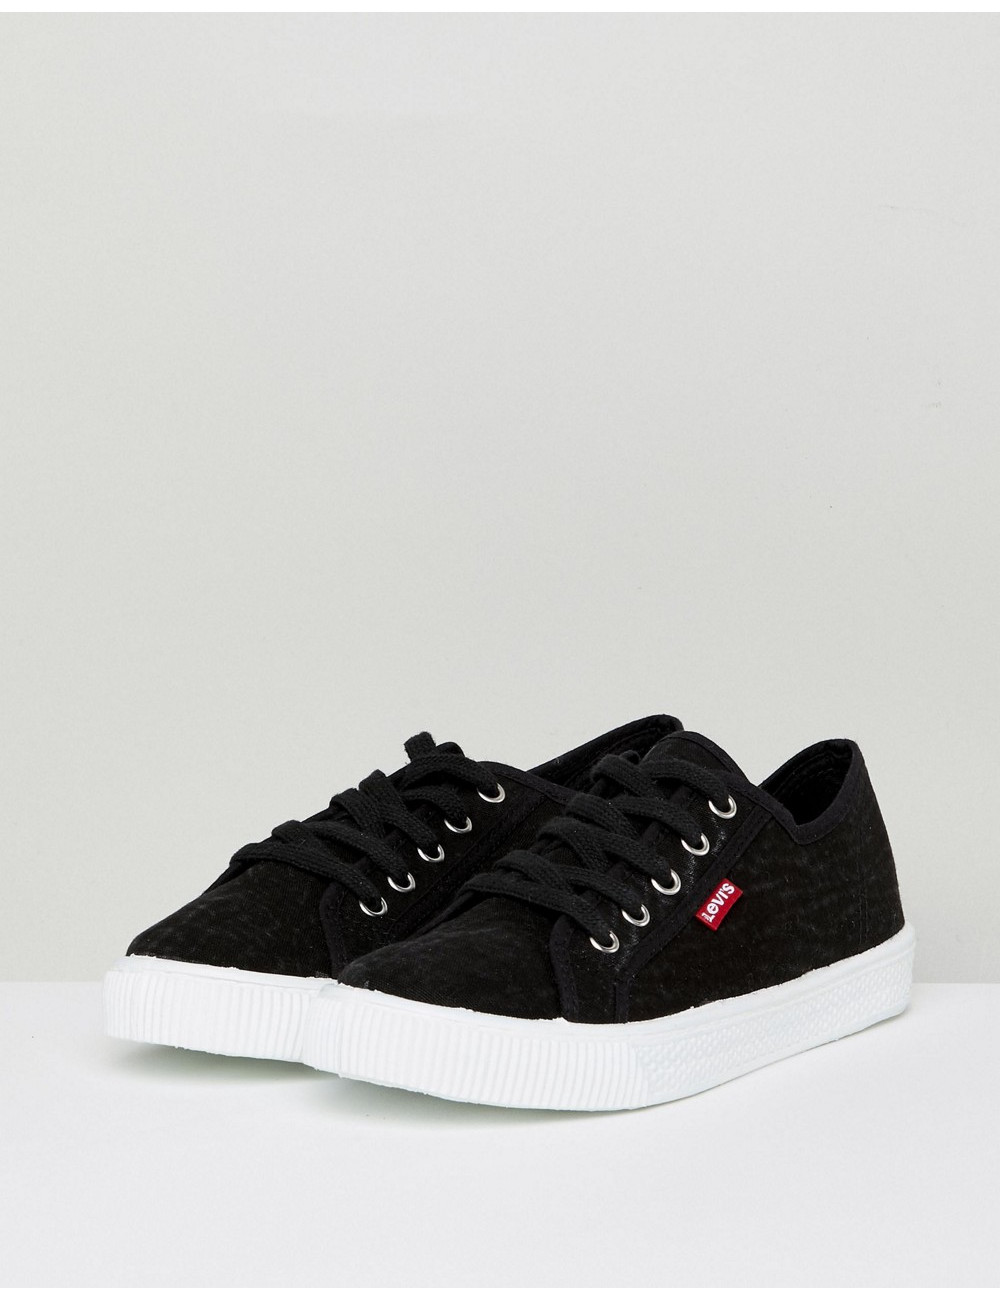 Levi's canvas shoe with red...